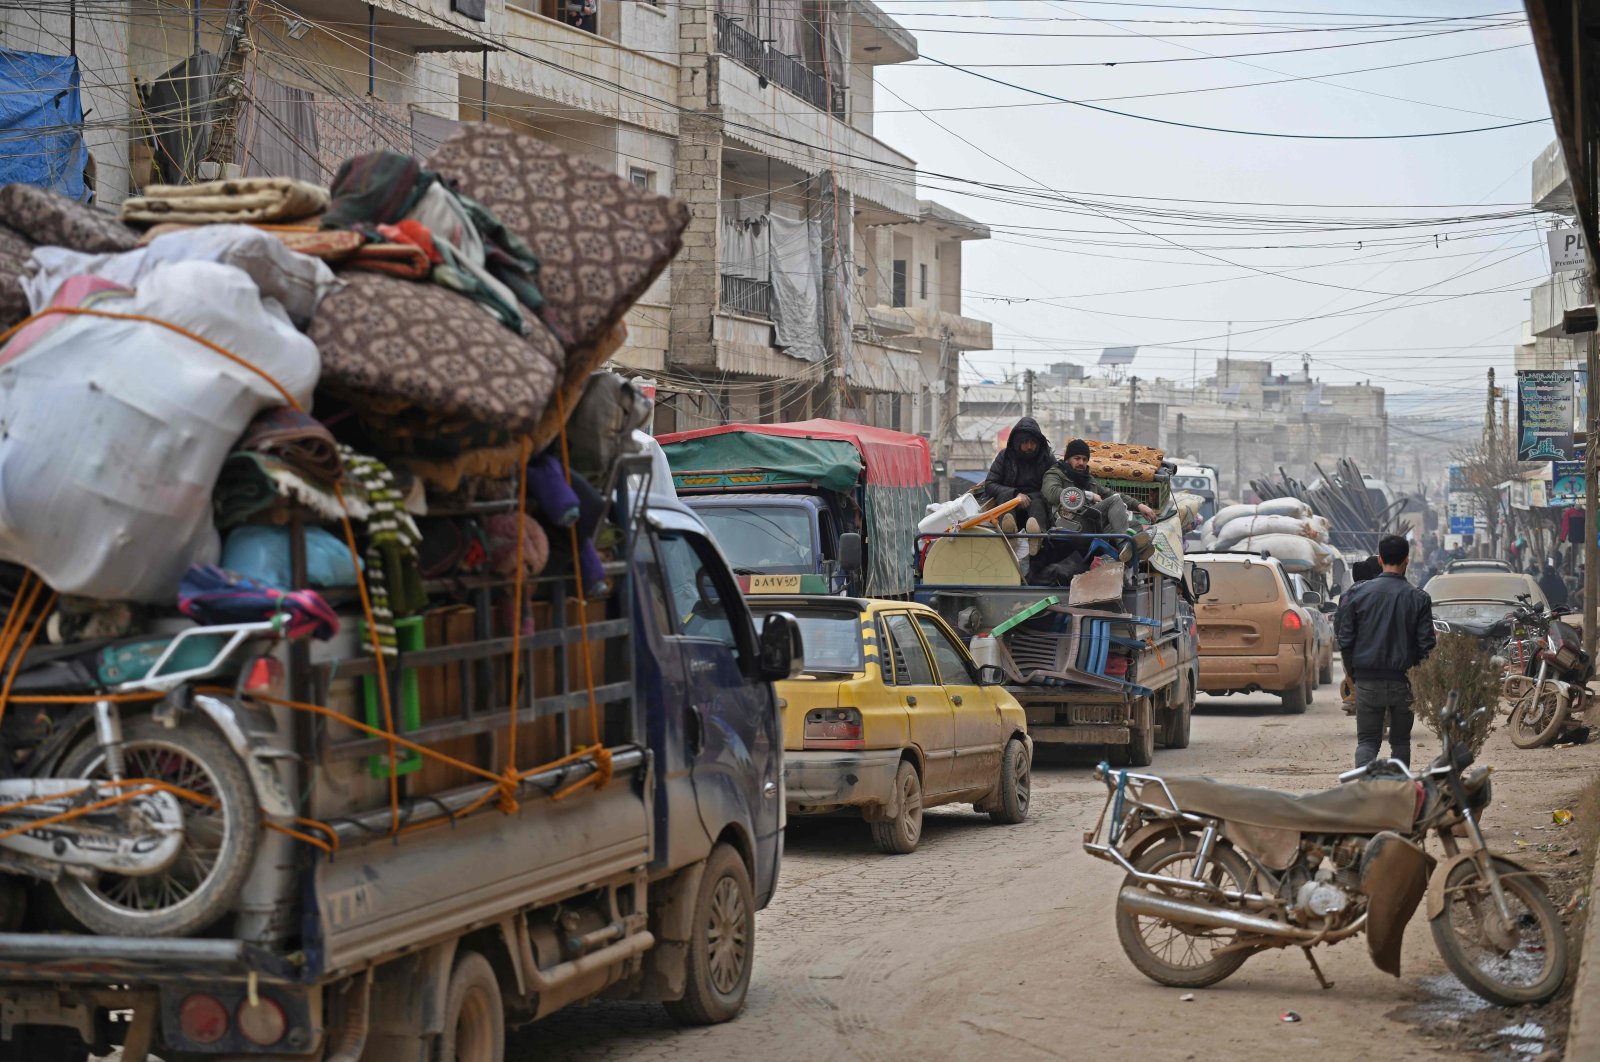  Vehicles carrying internally-displaced persons (IDPs) and their belongings drive through the Syrian town of Atme near the Turkish border towards the city of Afrin, as people flee advancing Syrian regime forces in Idlib and Aleppo provinces, Feb. 17, 2020. (AFP)